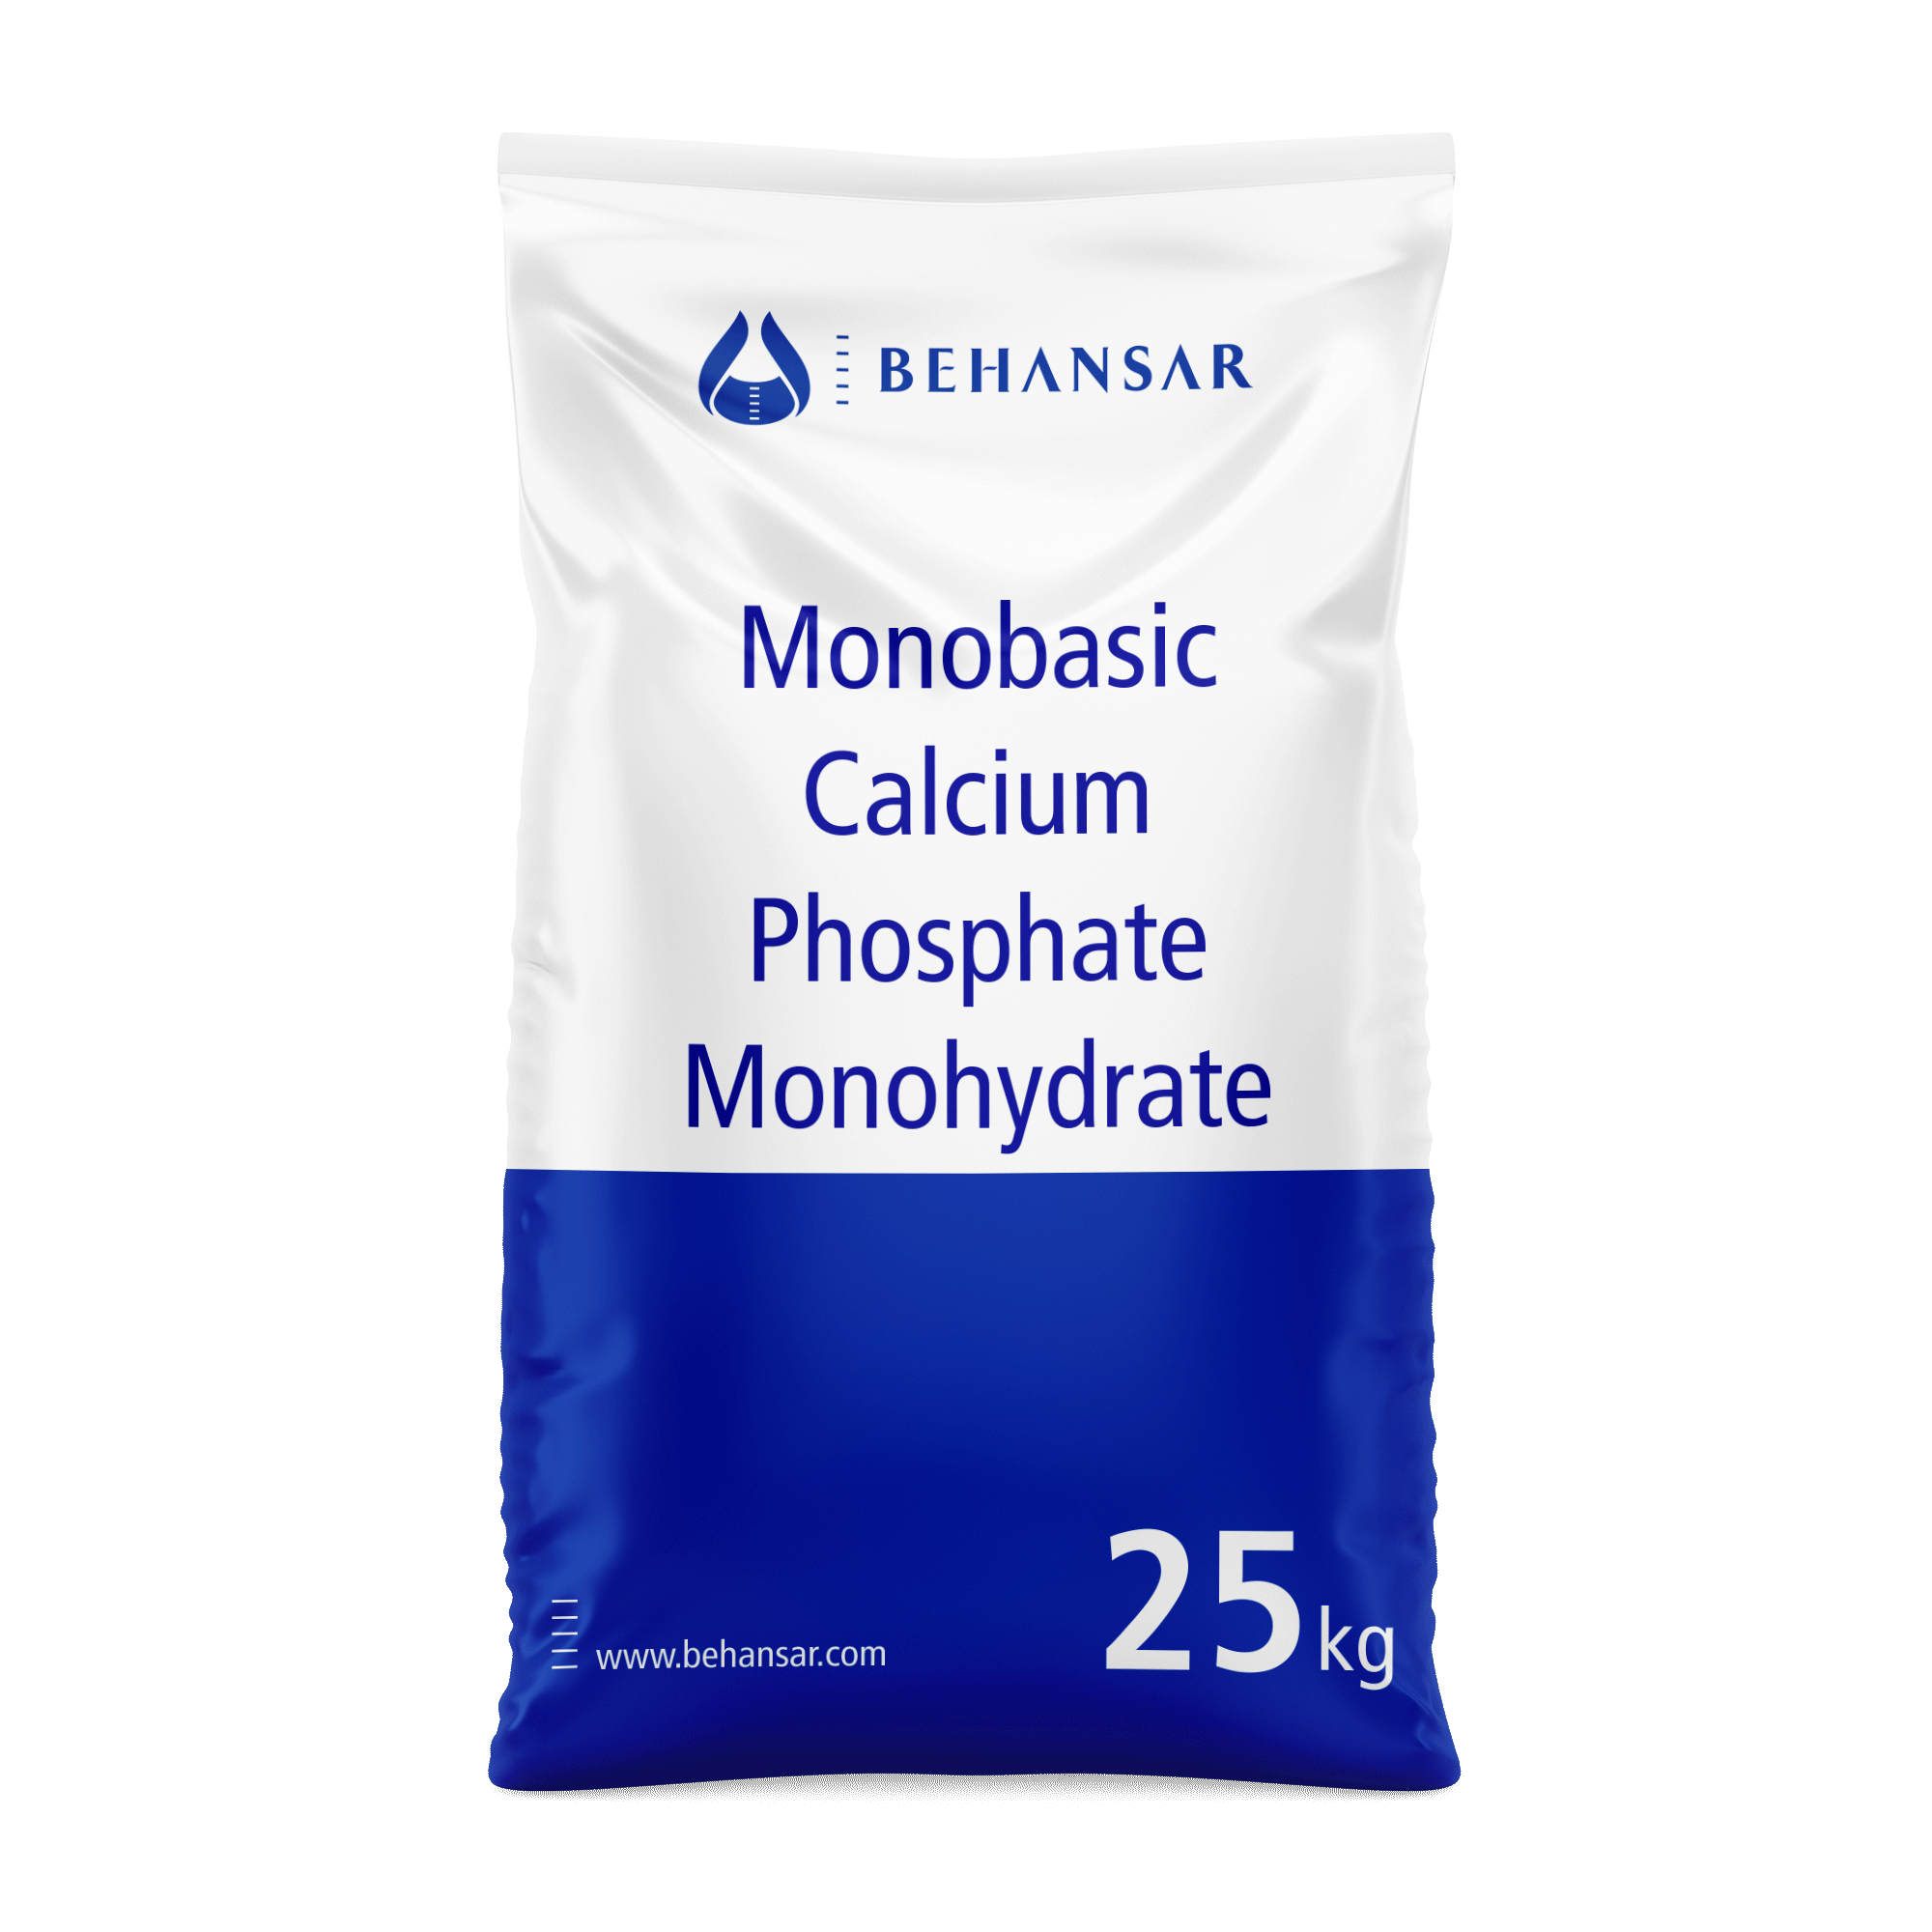 Monobasic Calcium Phosphate Monohydrate is one of the products of Behansar Co